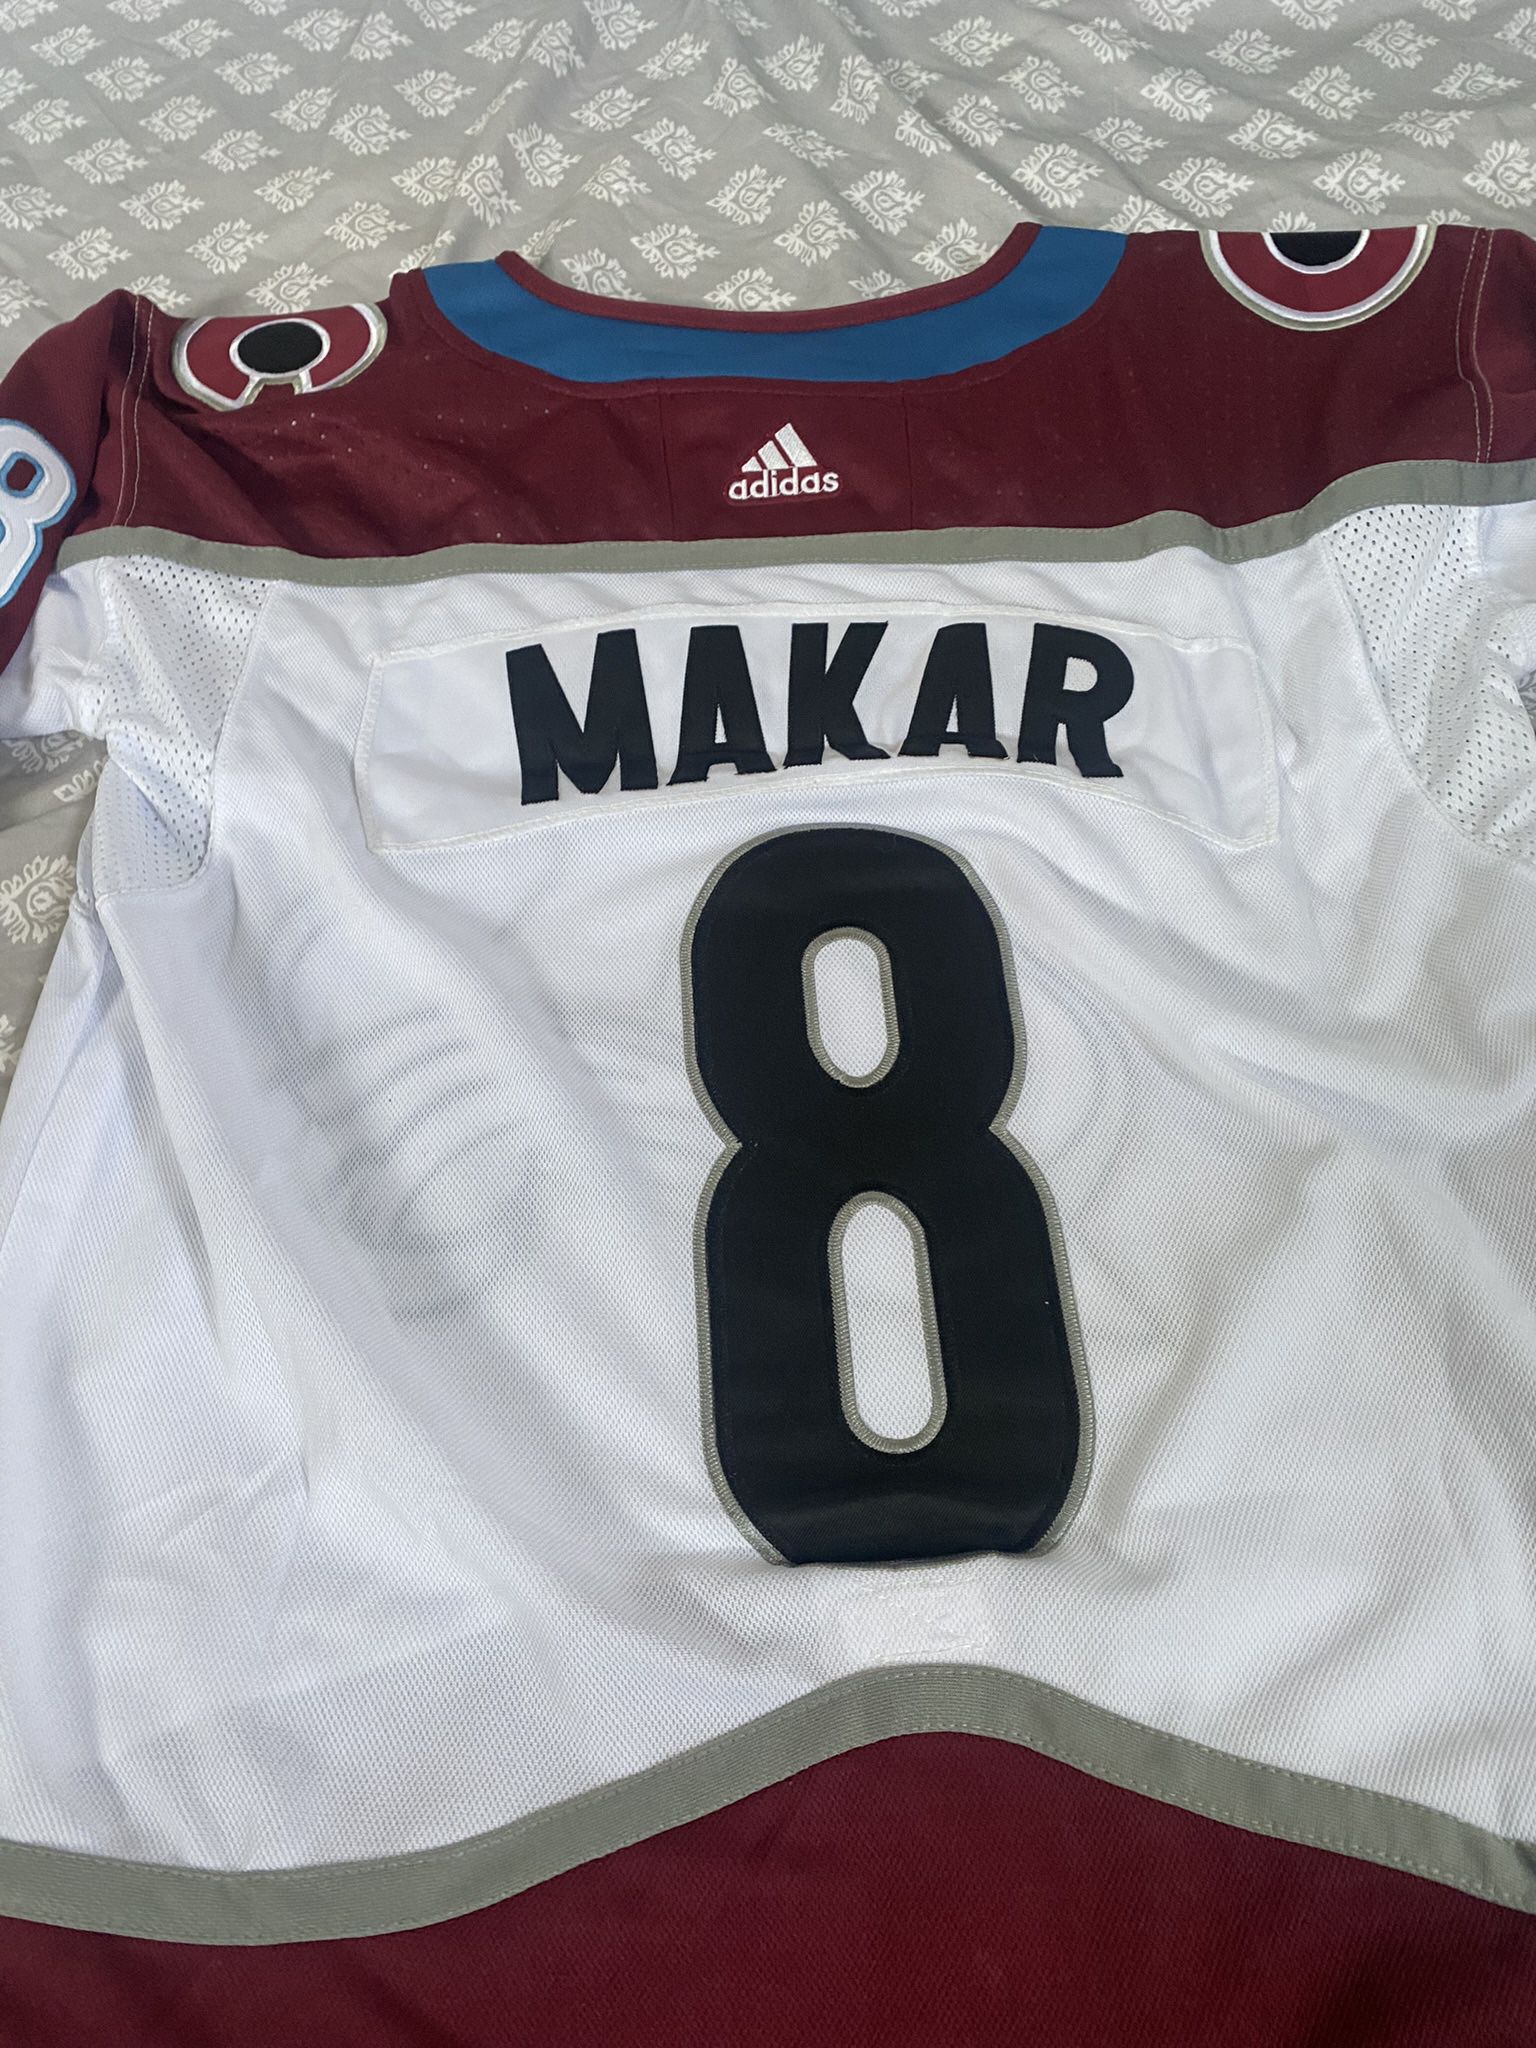 Adidas Colorado Avalanche Cake Makar Alternate Jersey for Sale in Garden  City P, NY - OfferUp